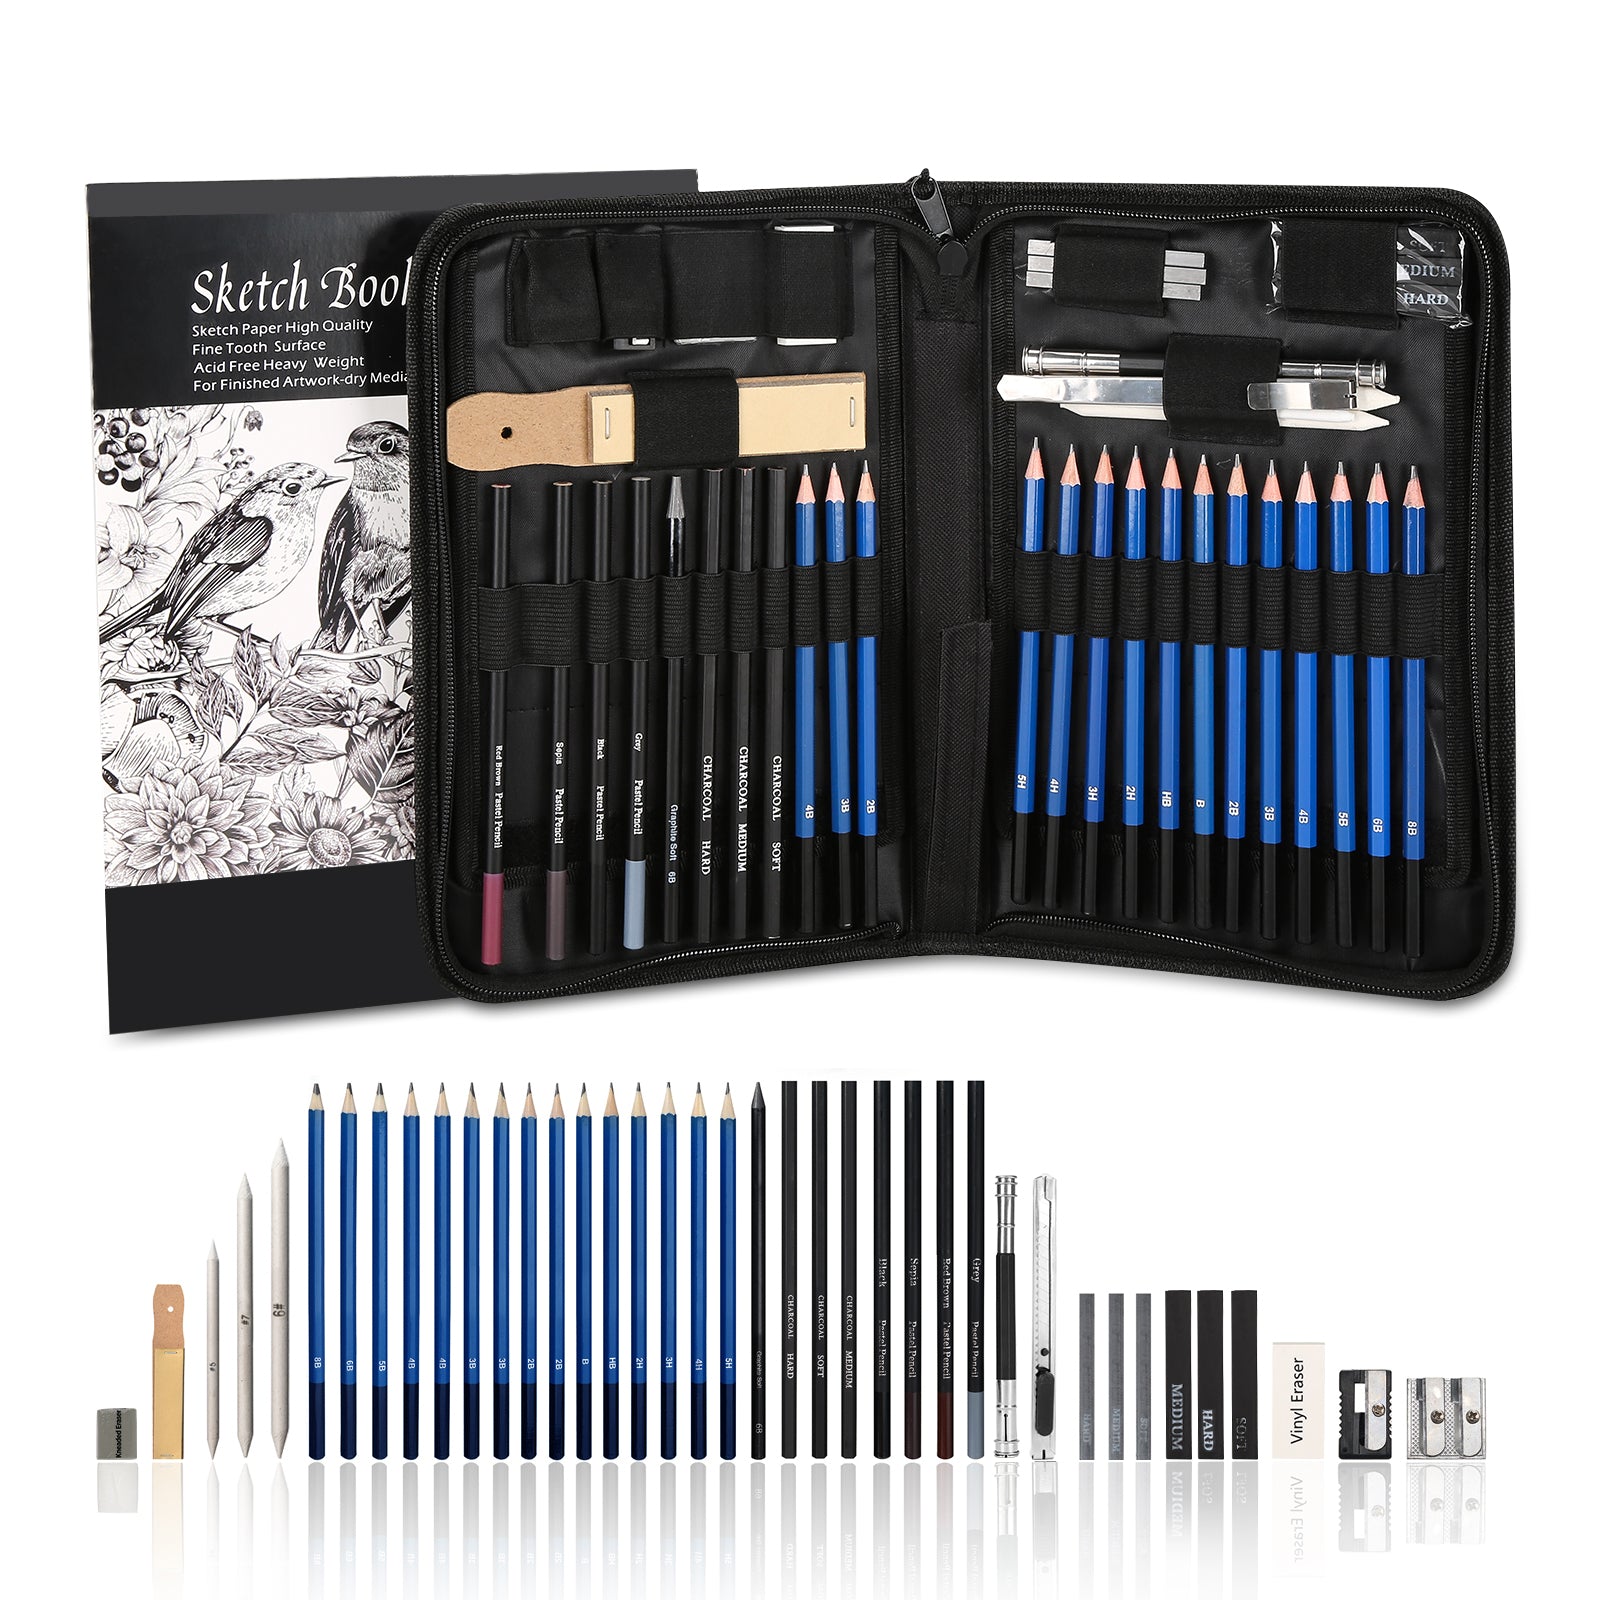  Sketch Pencils Set with Sketchbook, 41-Piece Professional Drawing  Set and a 50-Sheet Pad for Kids, Teens And Adults, Complete Artist Kit  Includes Pencils, Erasers, Pastels, A Handy Case etc. 